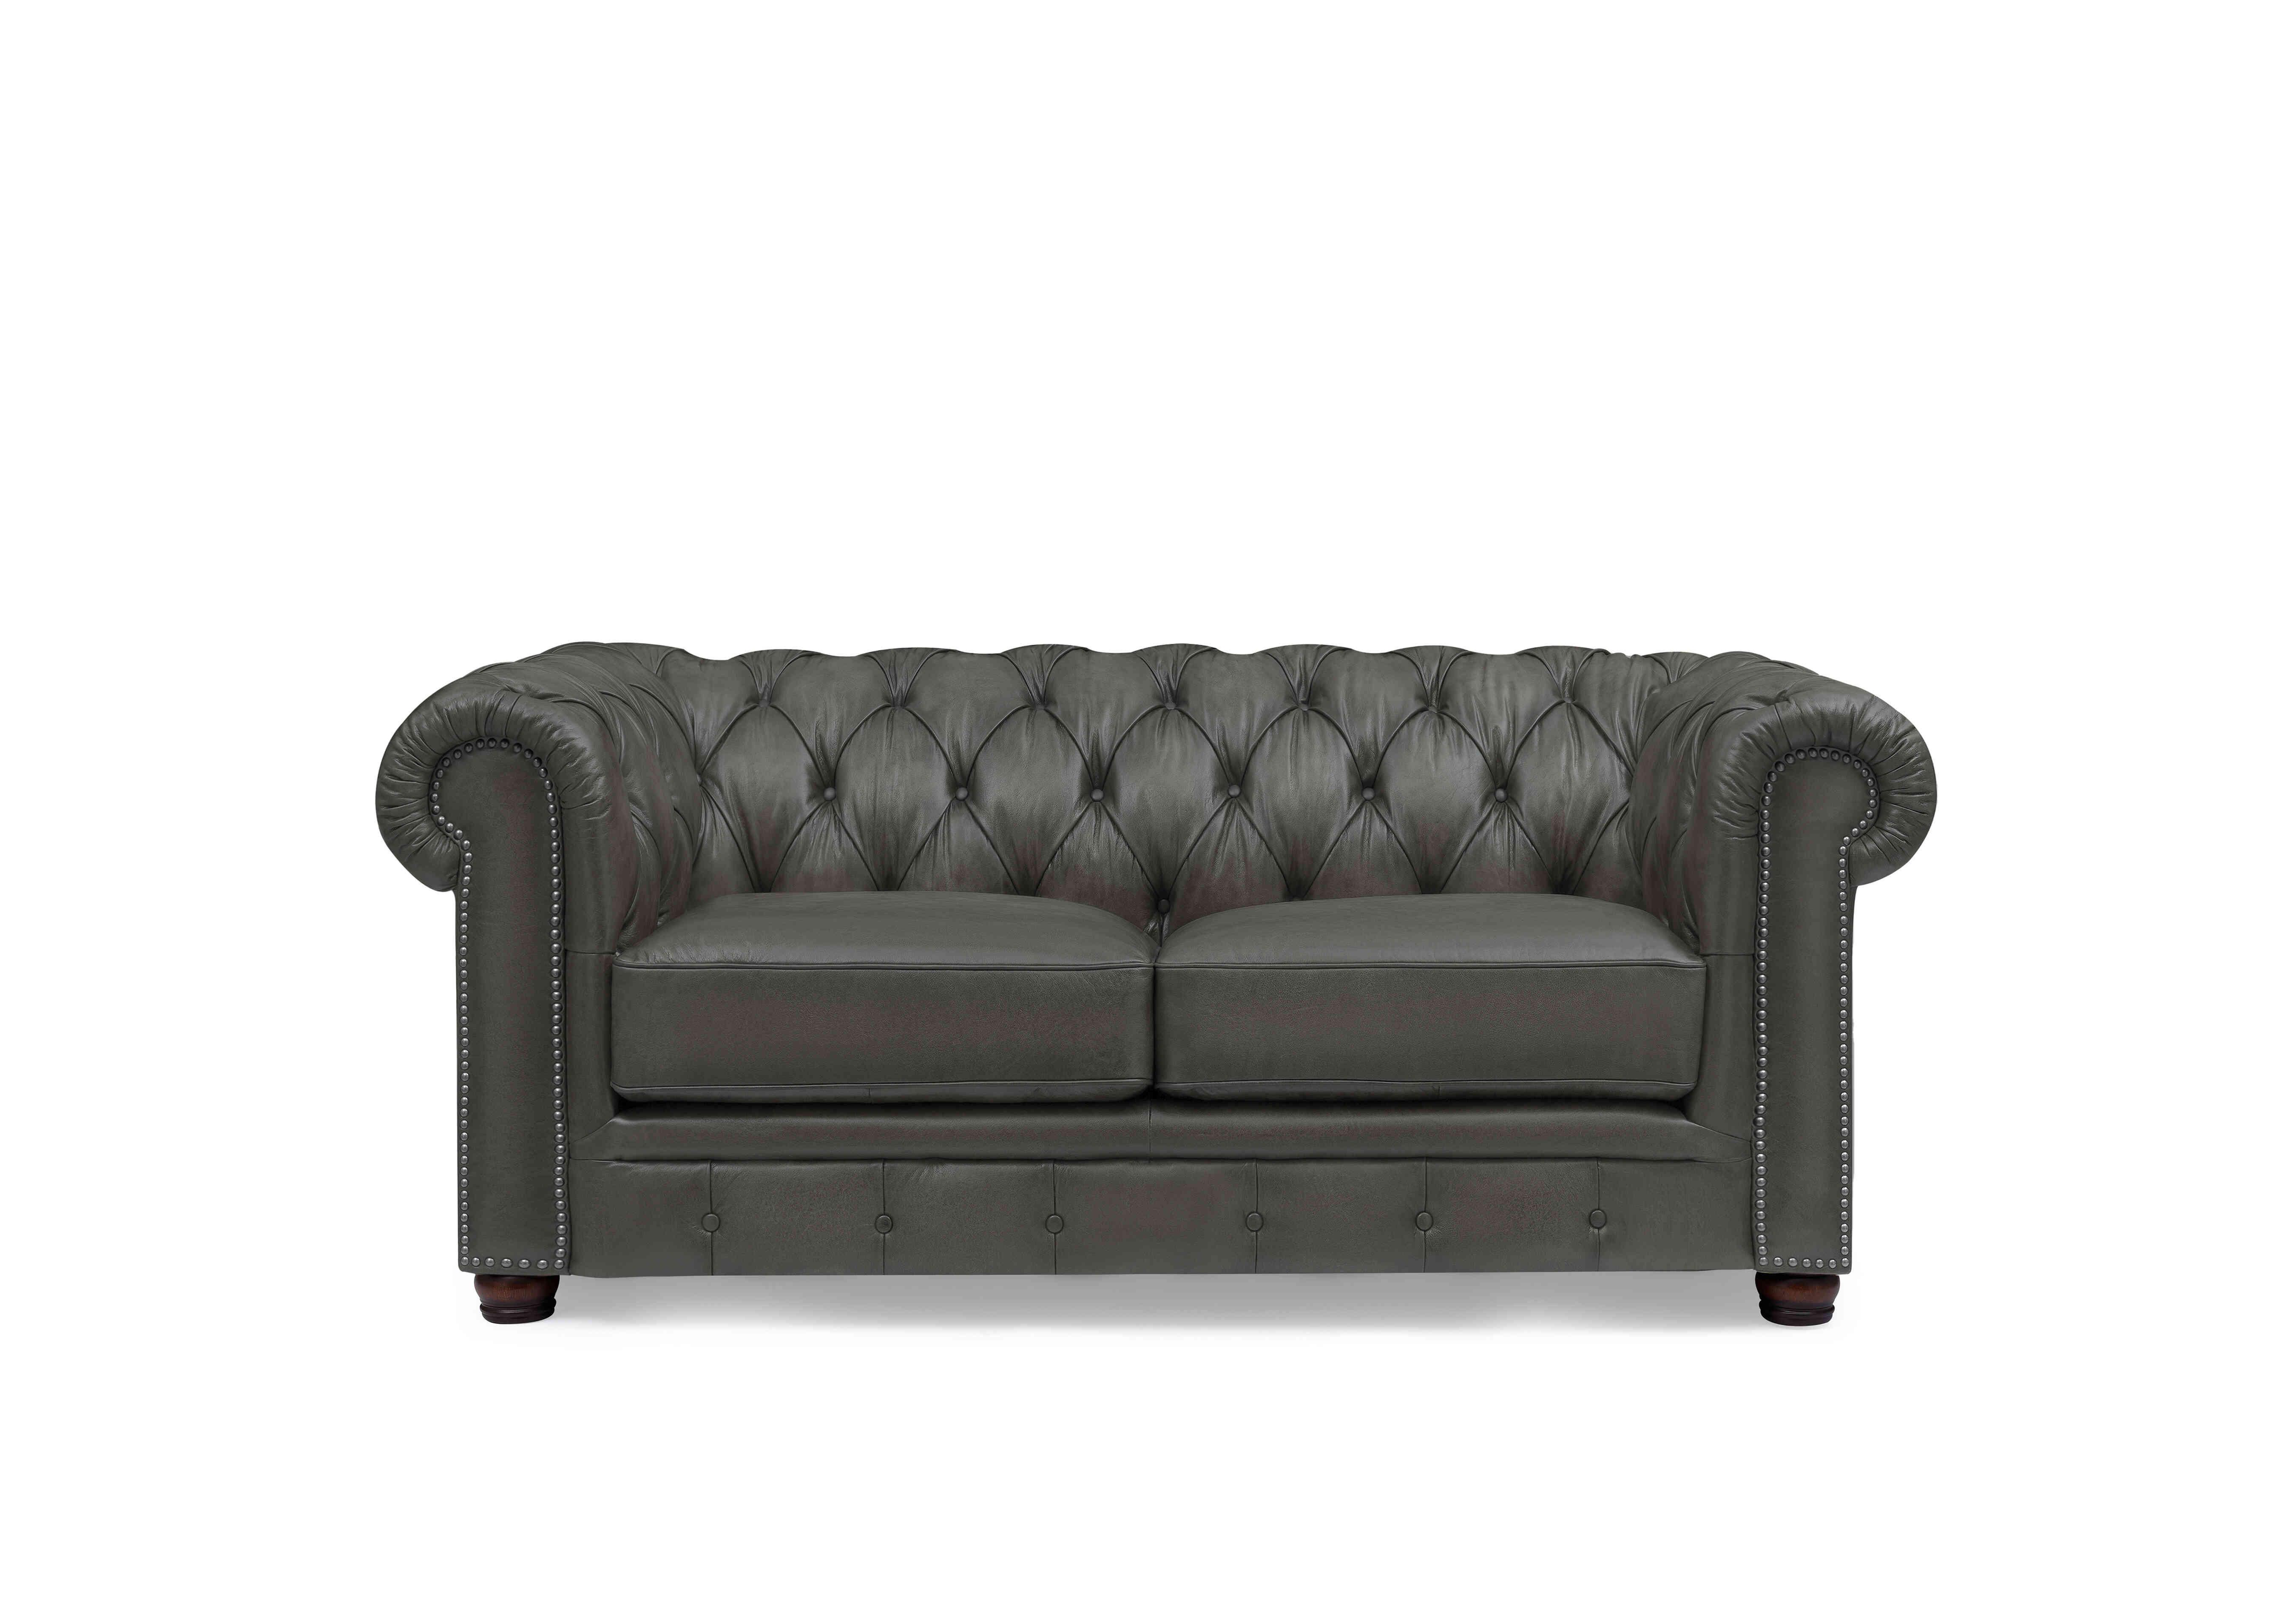 Shackleton 2 Seater Leather Chesterfield Sofa with USB-C in X3y2-1966ls Granite on Furniture Village